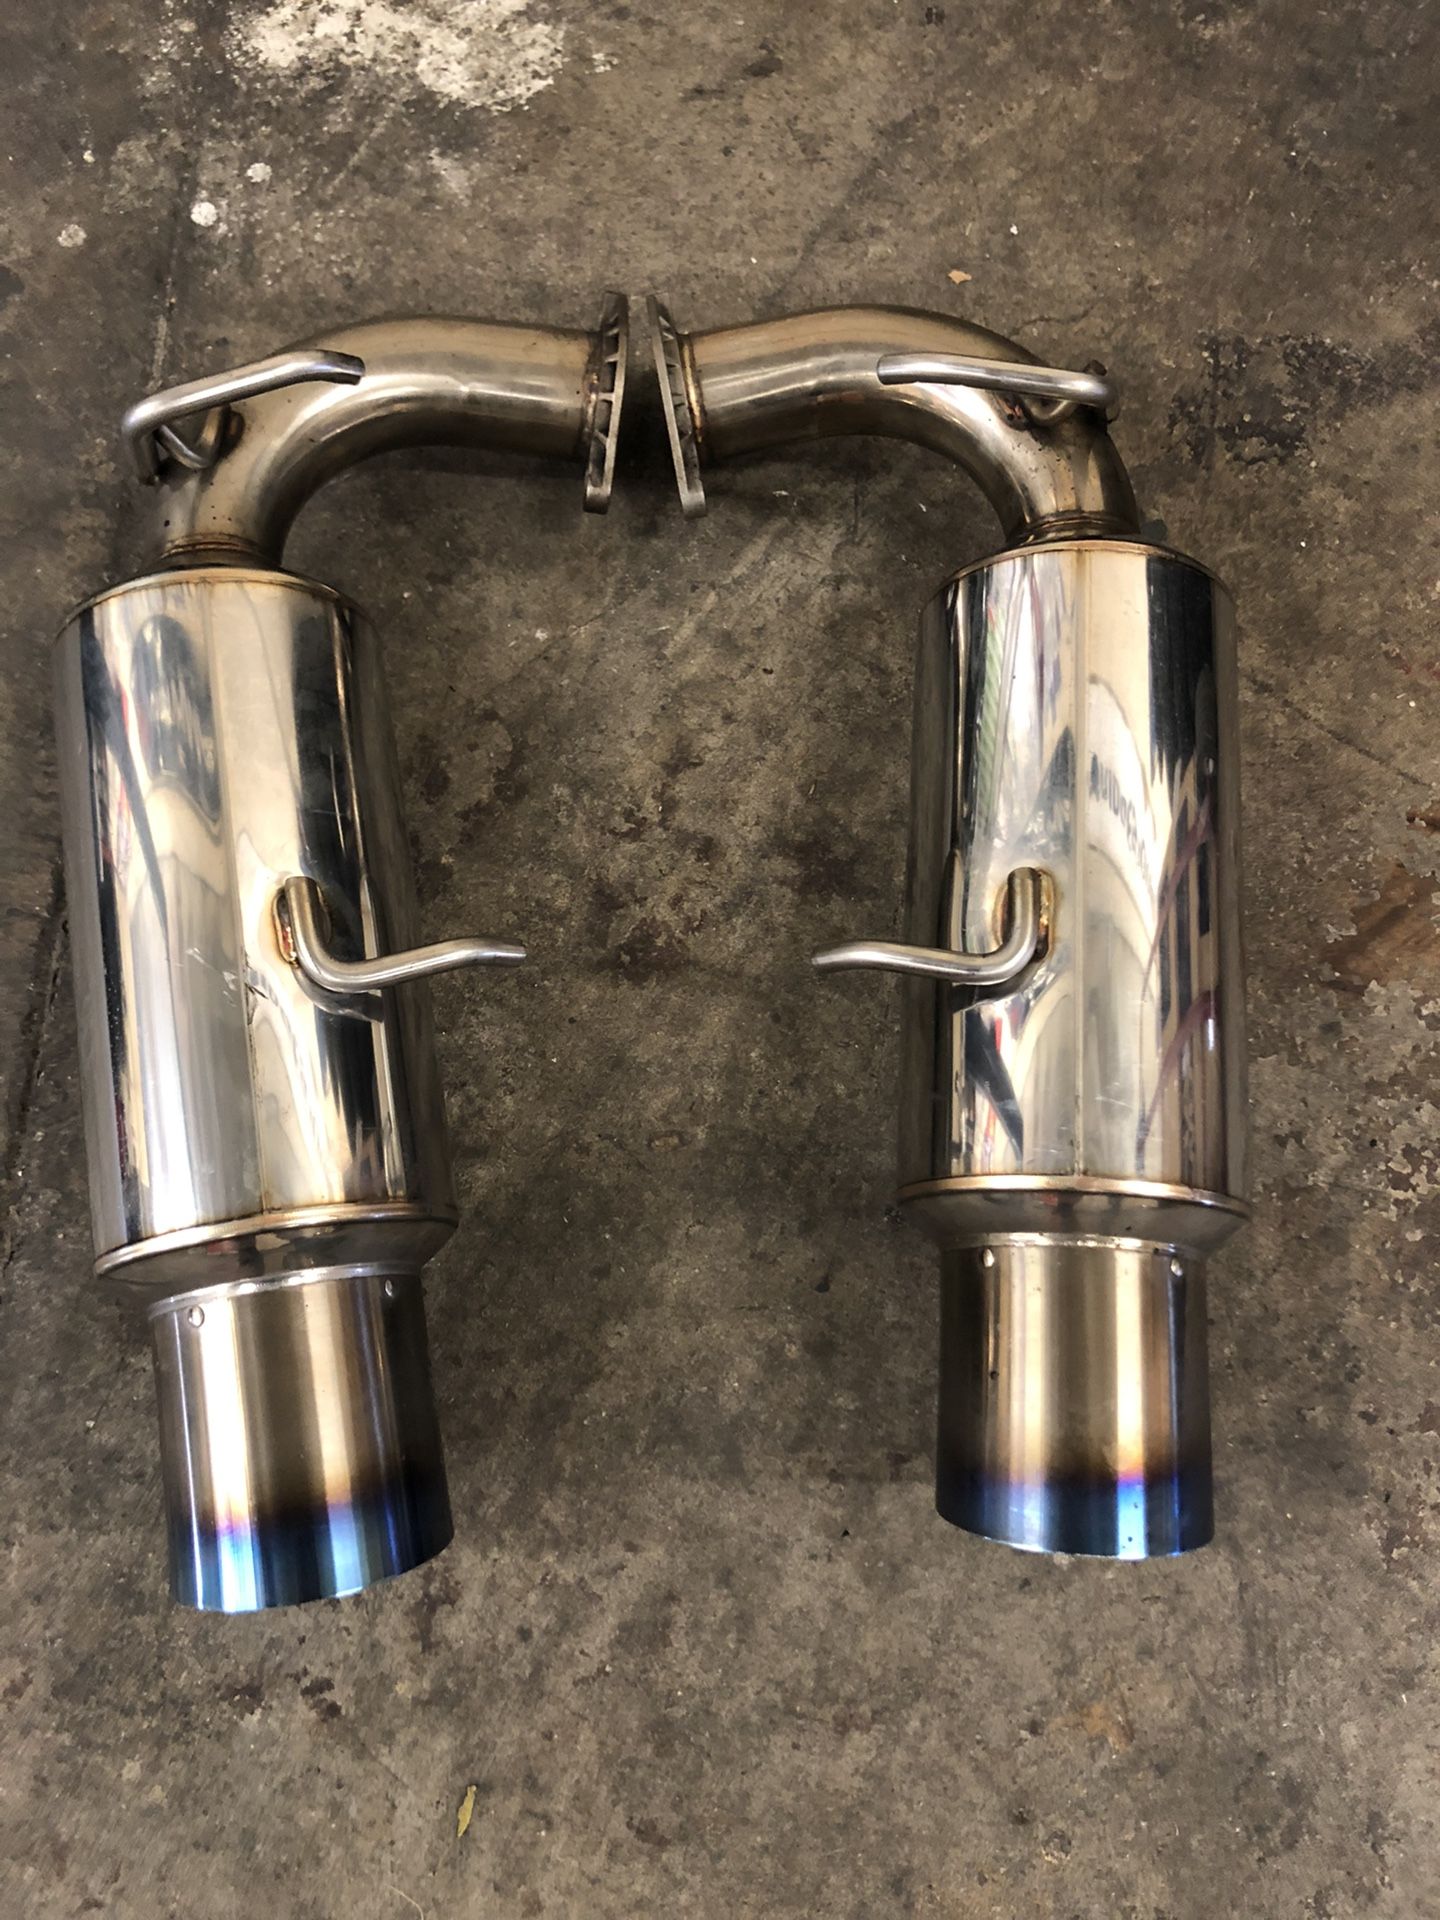 X2 Used Invidia N1 Mufflers Only For Scion FR-S Or Subaru BRZ 